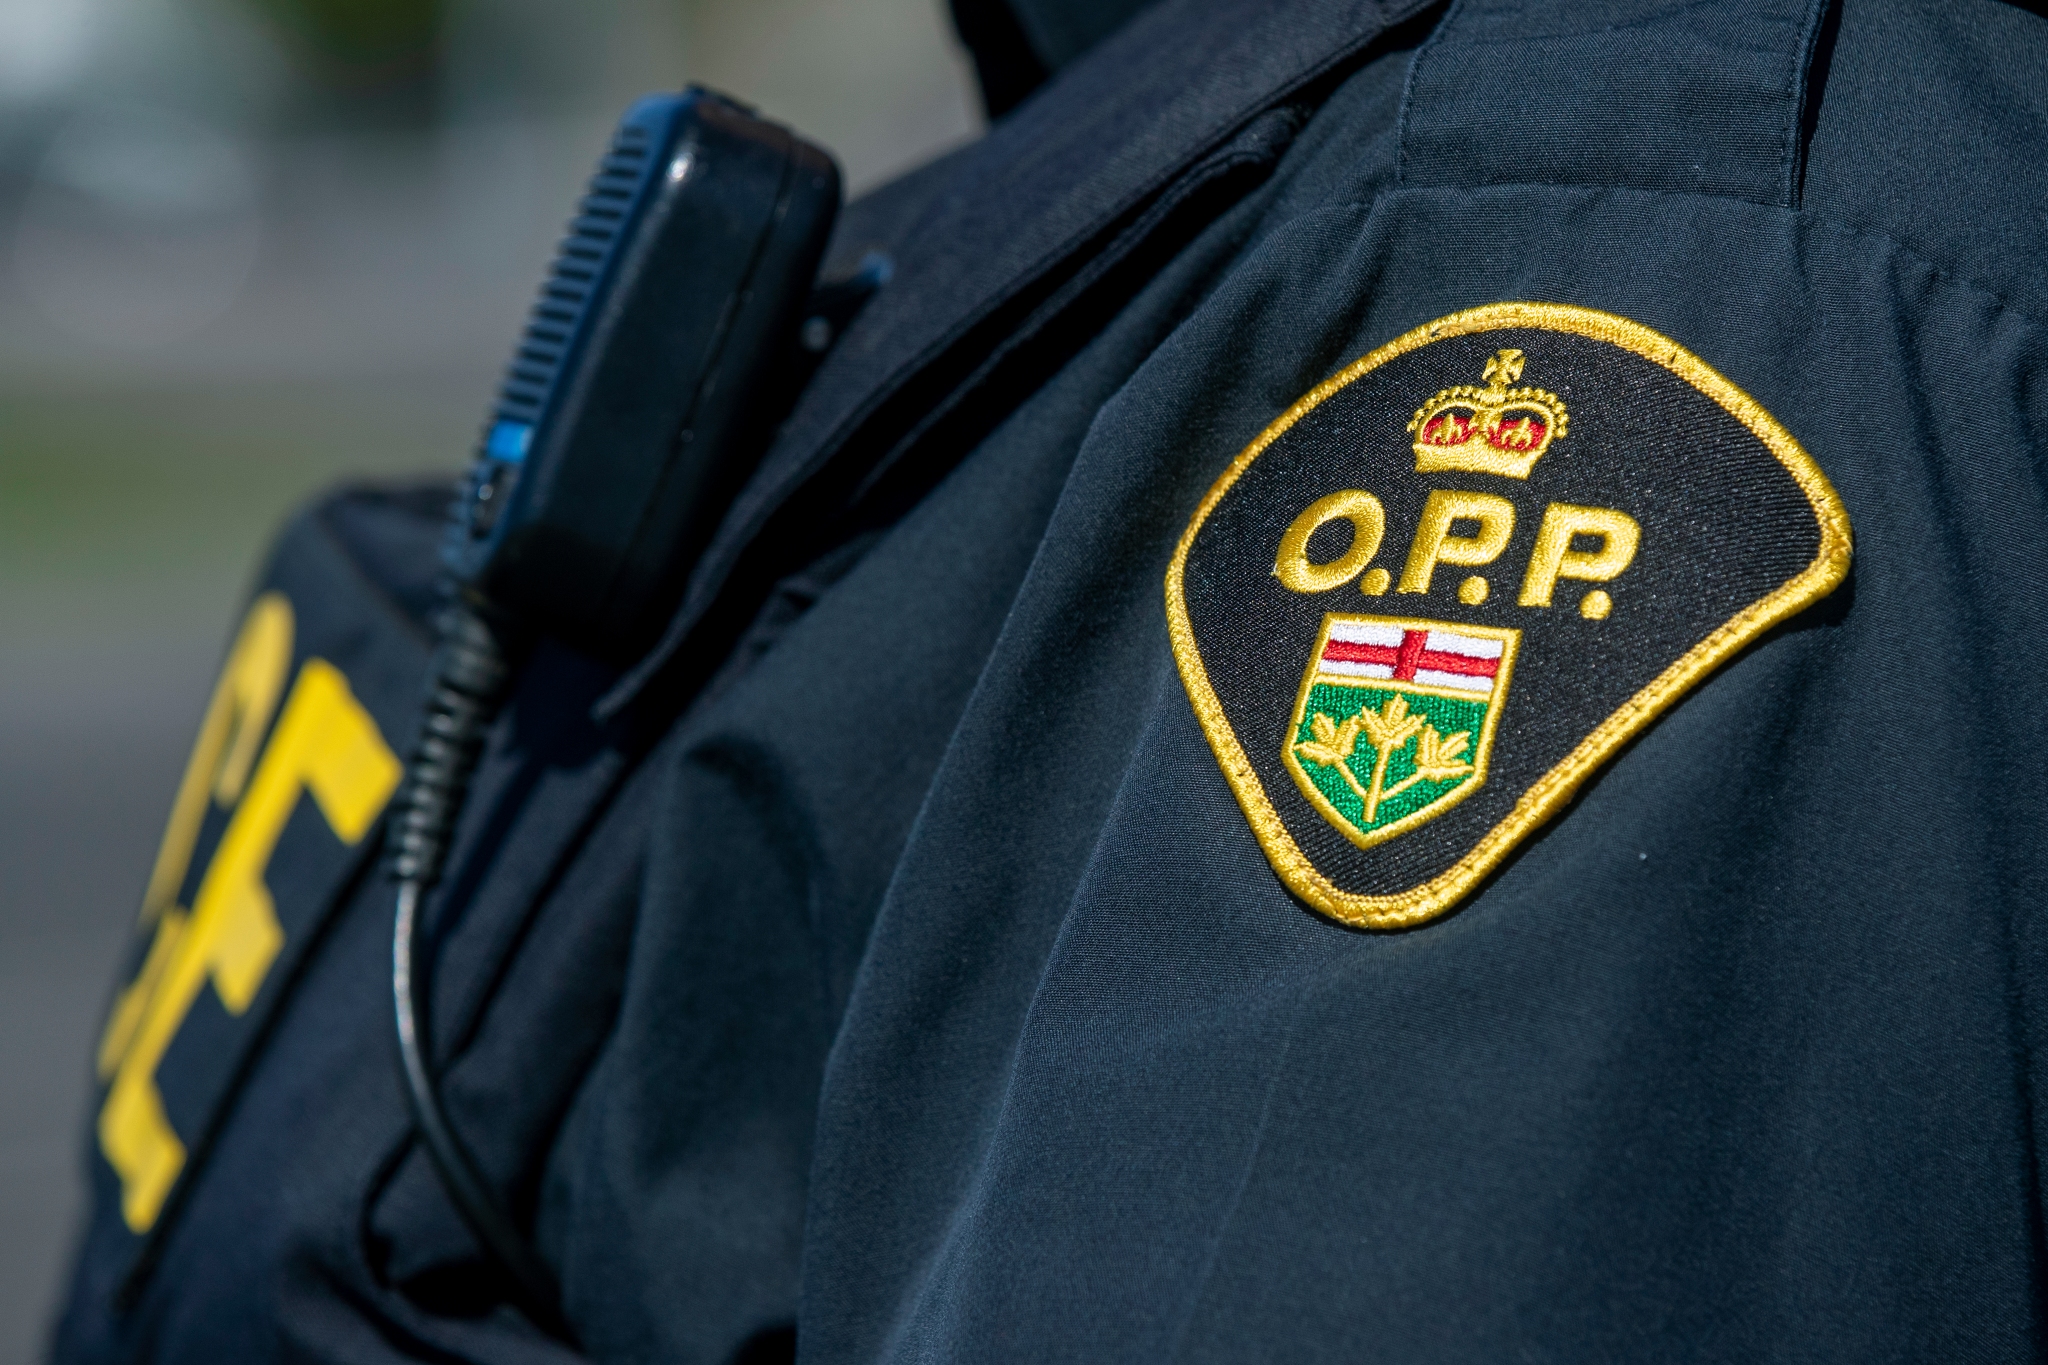 Woman followed by man performing indecent act on hiking trail: Elgin County OPP